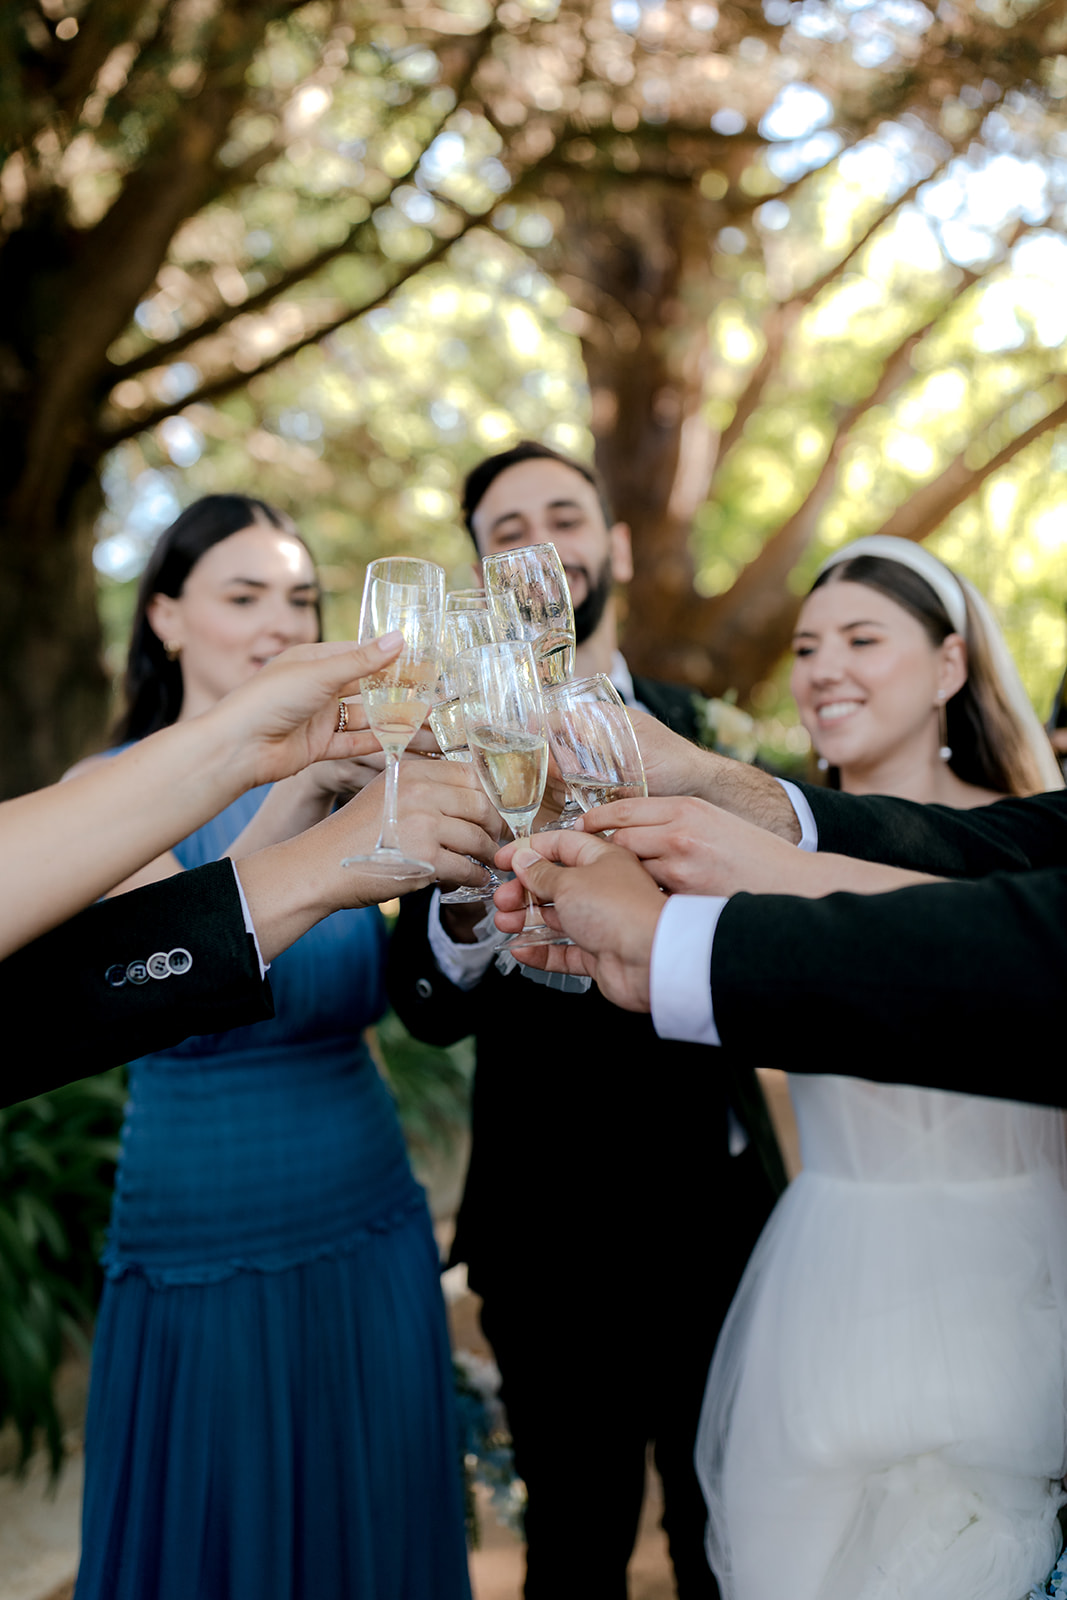 Bride & groom popping champagne with their wedding party during their elegant country wedding.